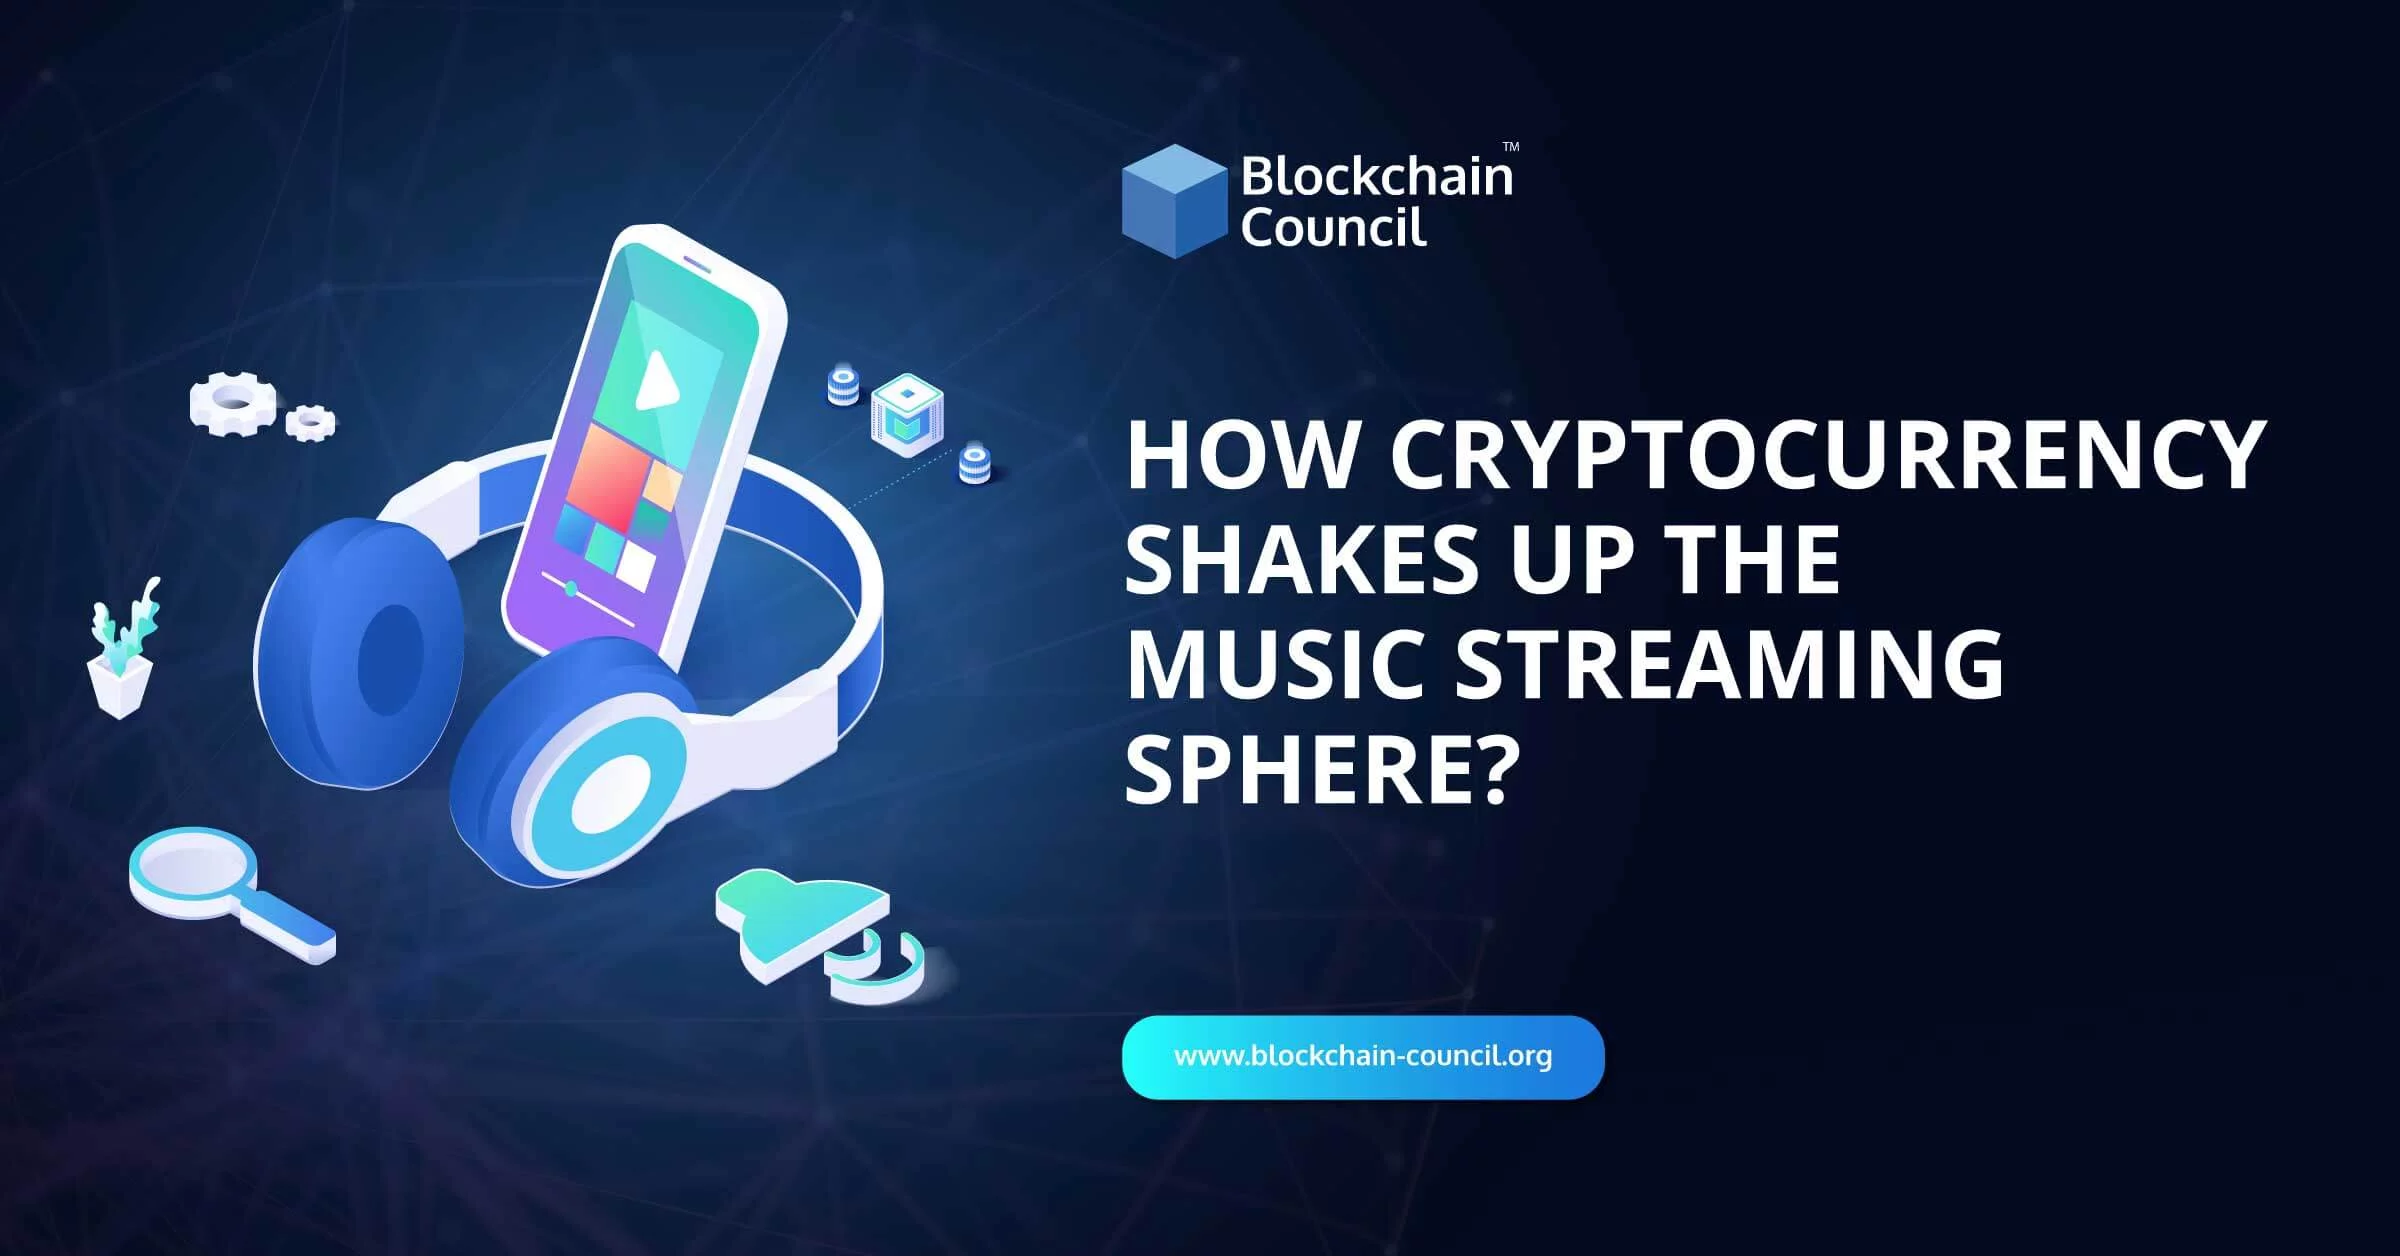 How-Cryptocurrency-Shakes-Up-the-Music-Streaming-Sphere (1)